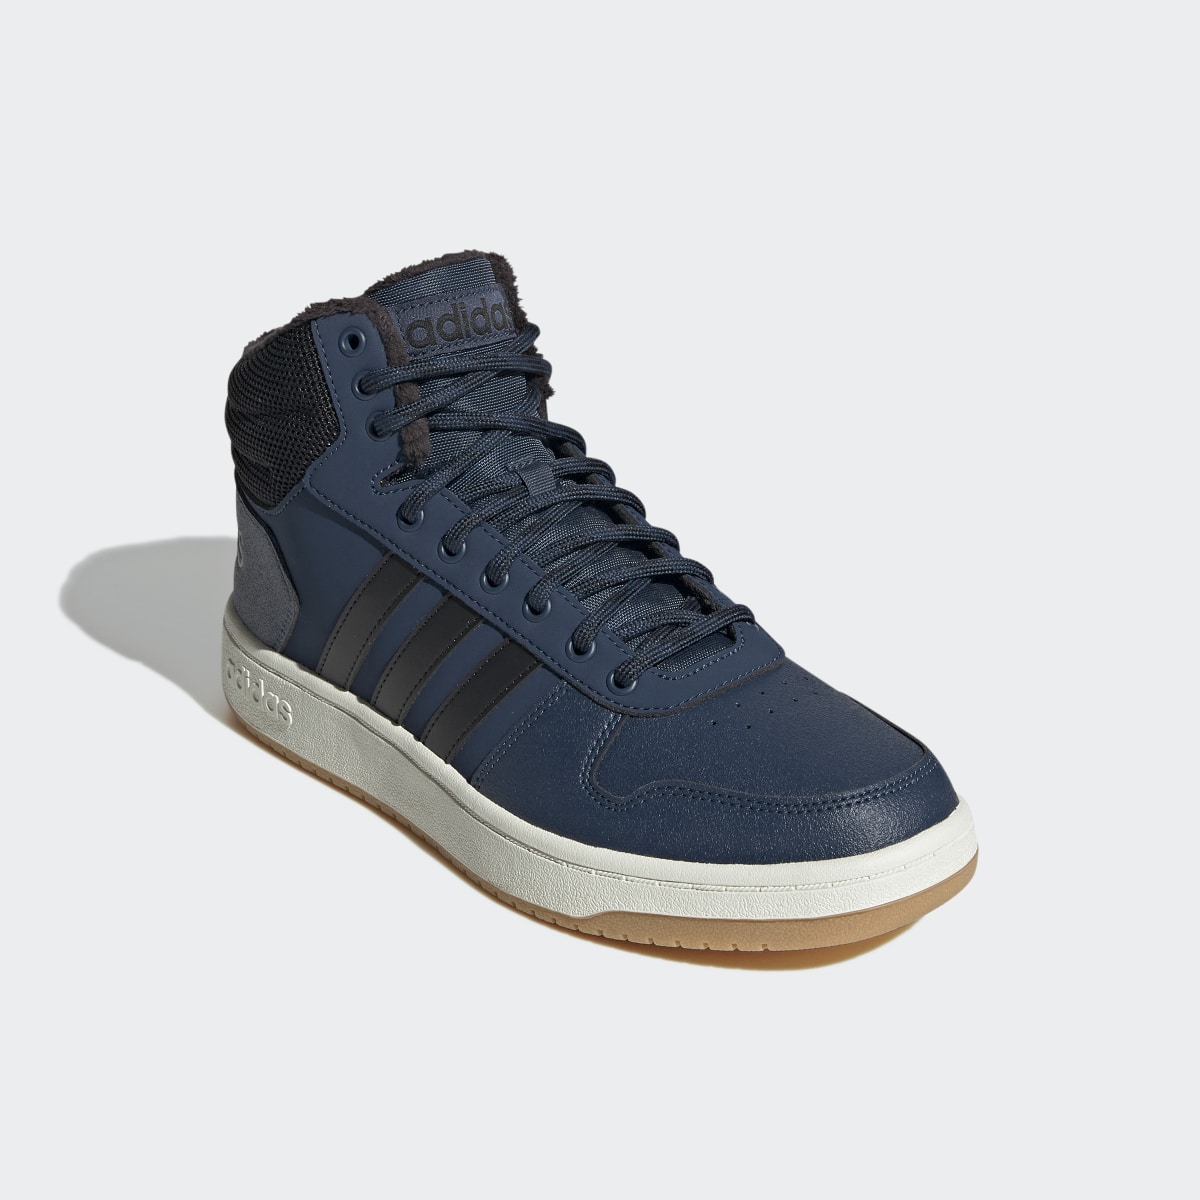 Adidas Chaussure Hoops 2.0 Mid. 5